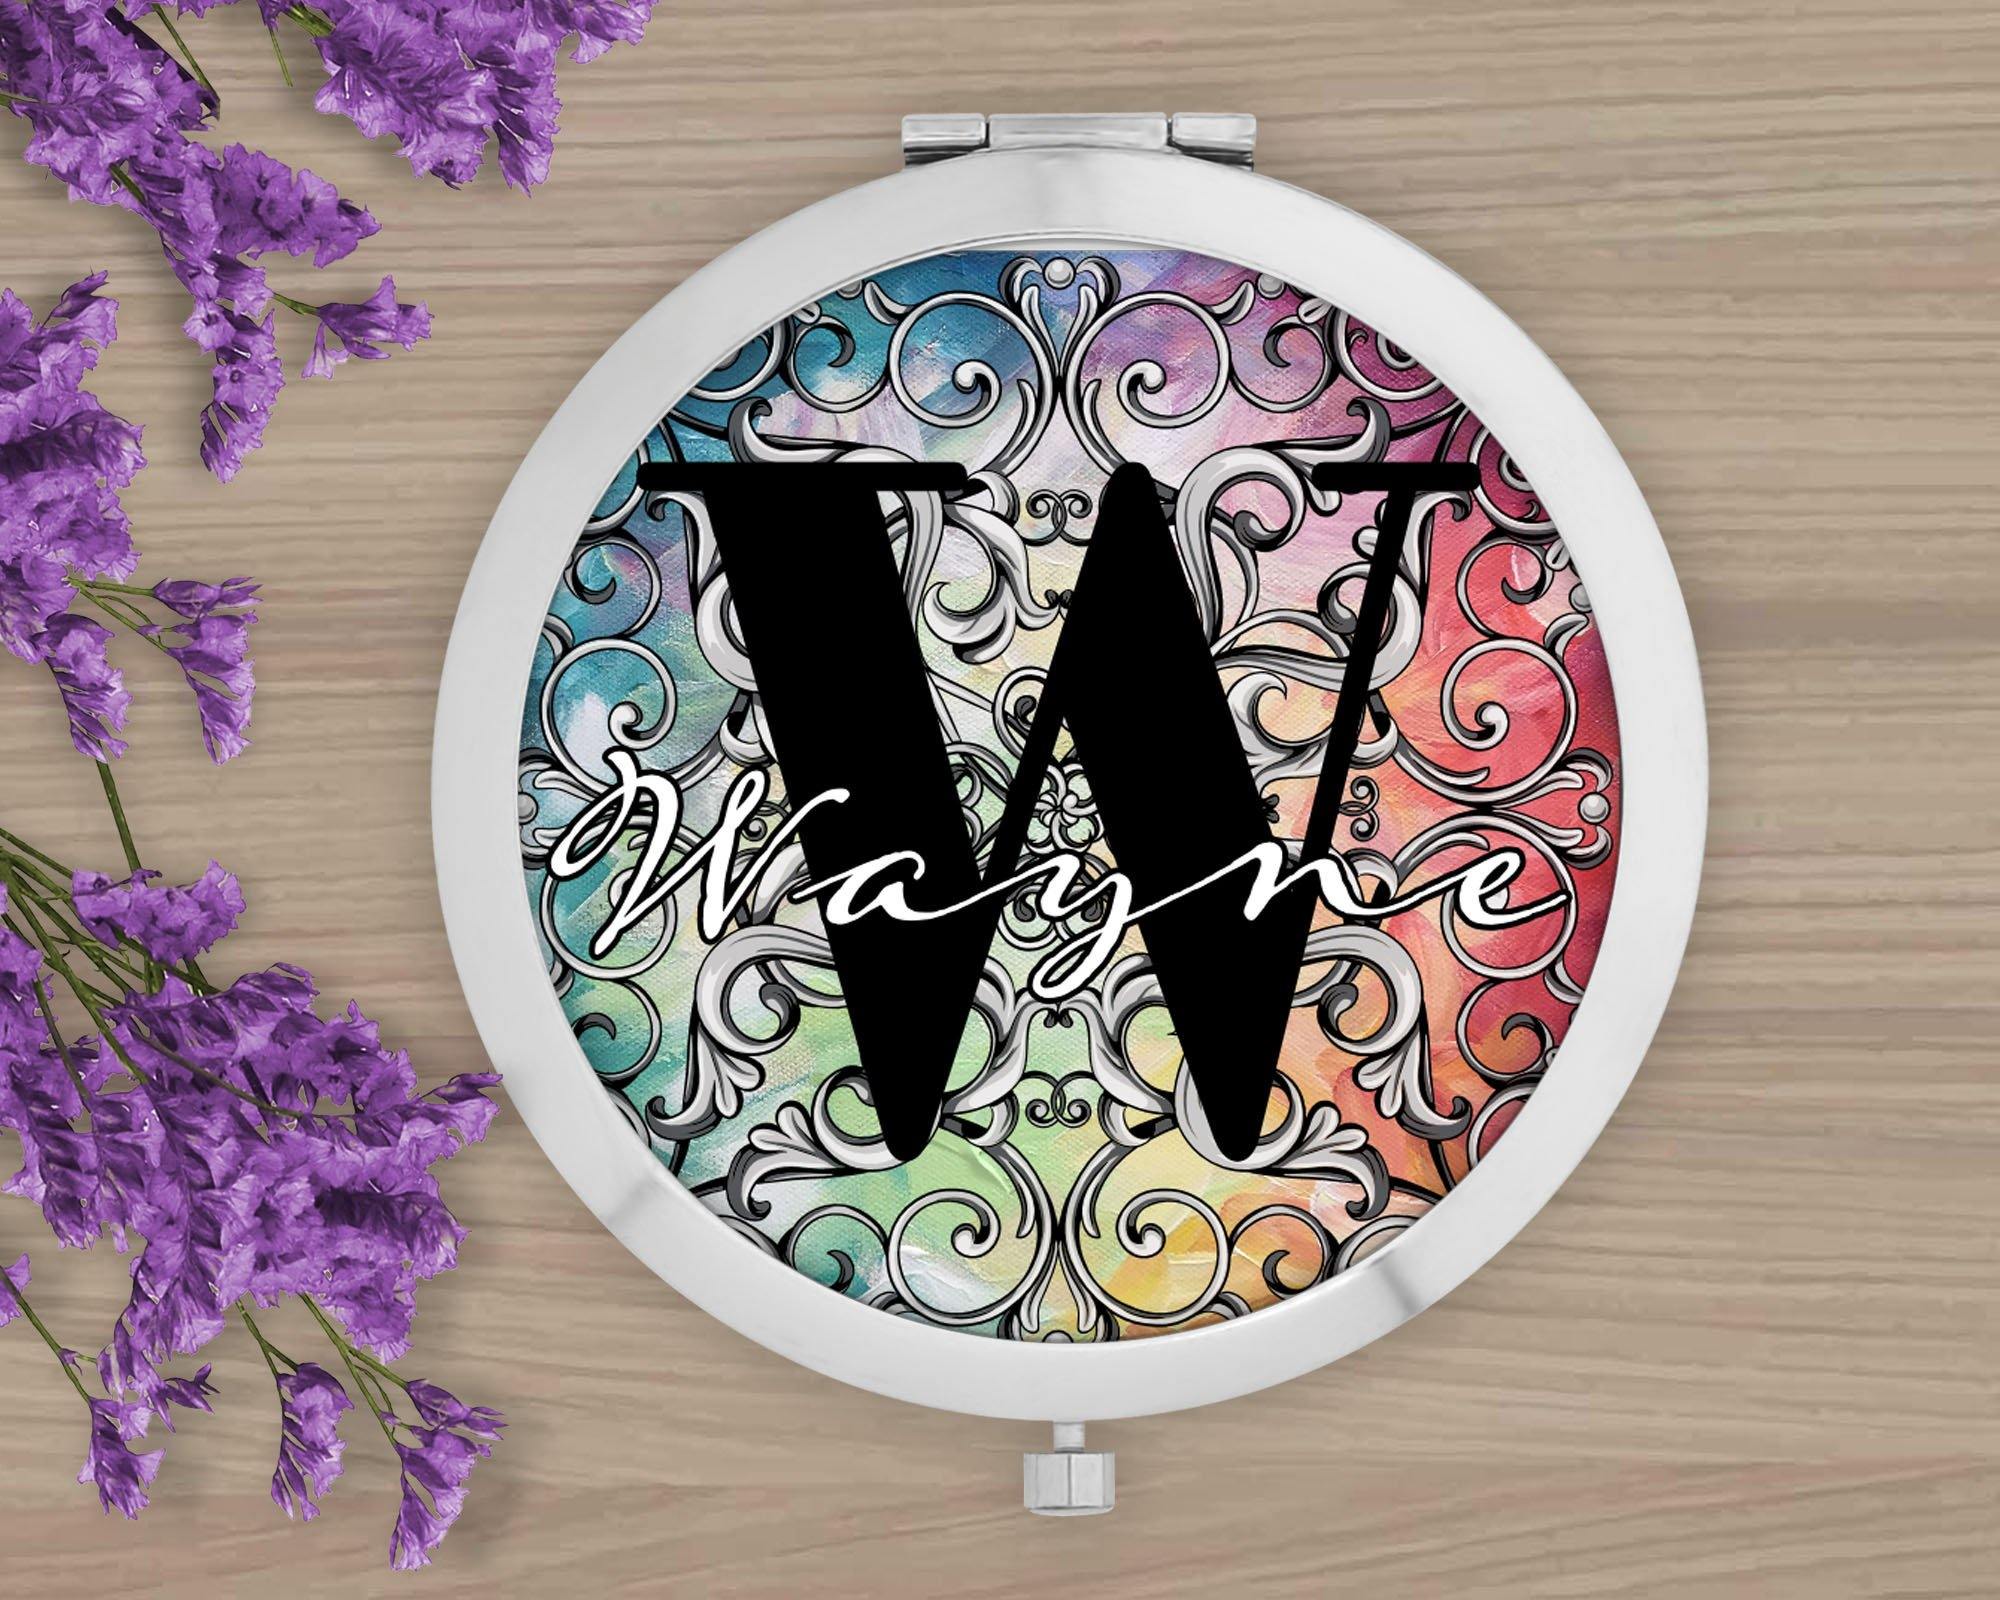 Personalized Compacts | Custom Compacts | Makeup & Cosmetics | Colorful - This & That Solutions - Personalized Compacts | Custom Compacts | Makeup & Cosmetics | Colorful - Personalized Gifts & Custom Home Decor